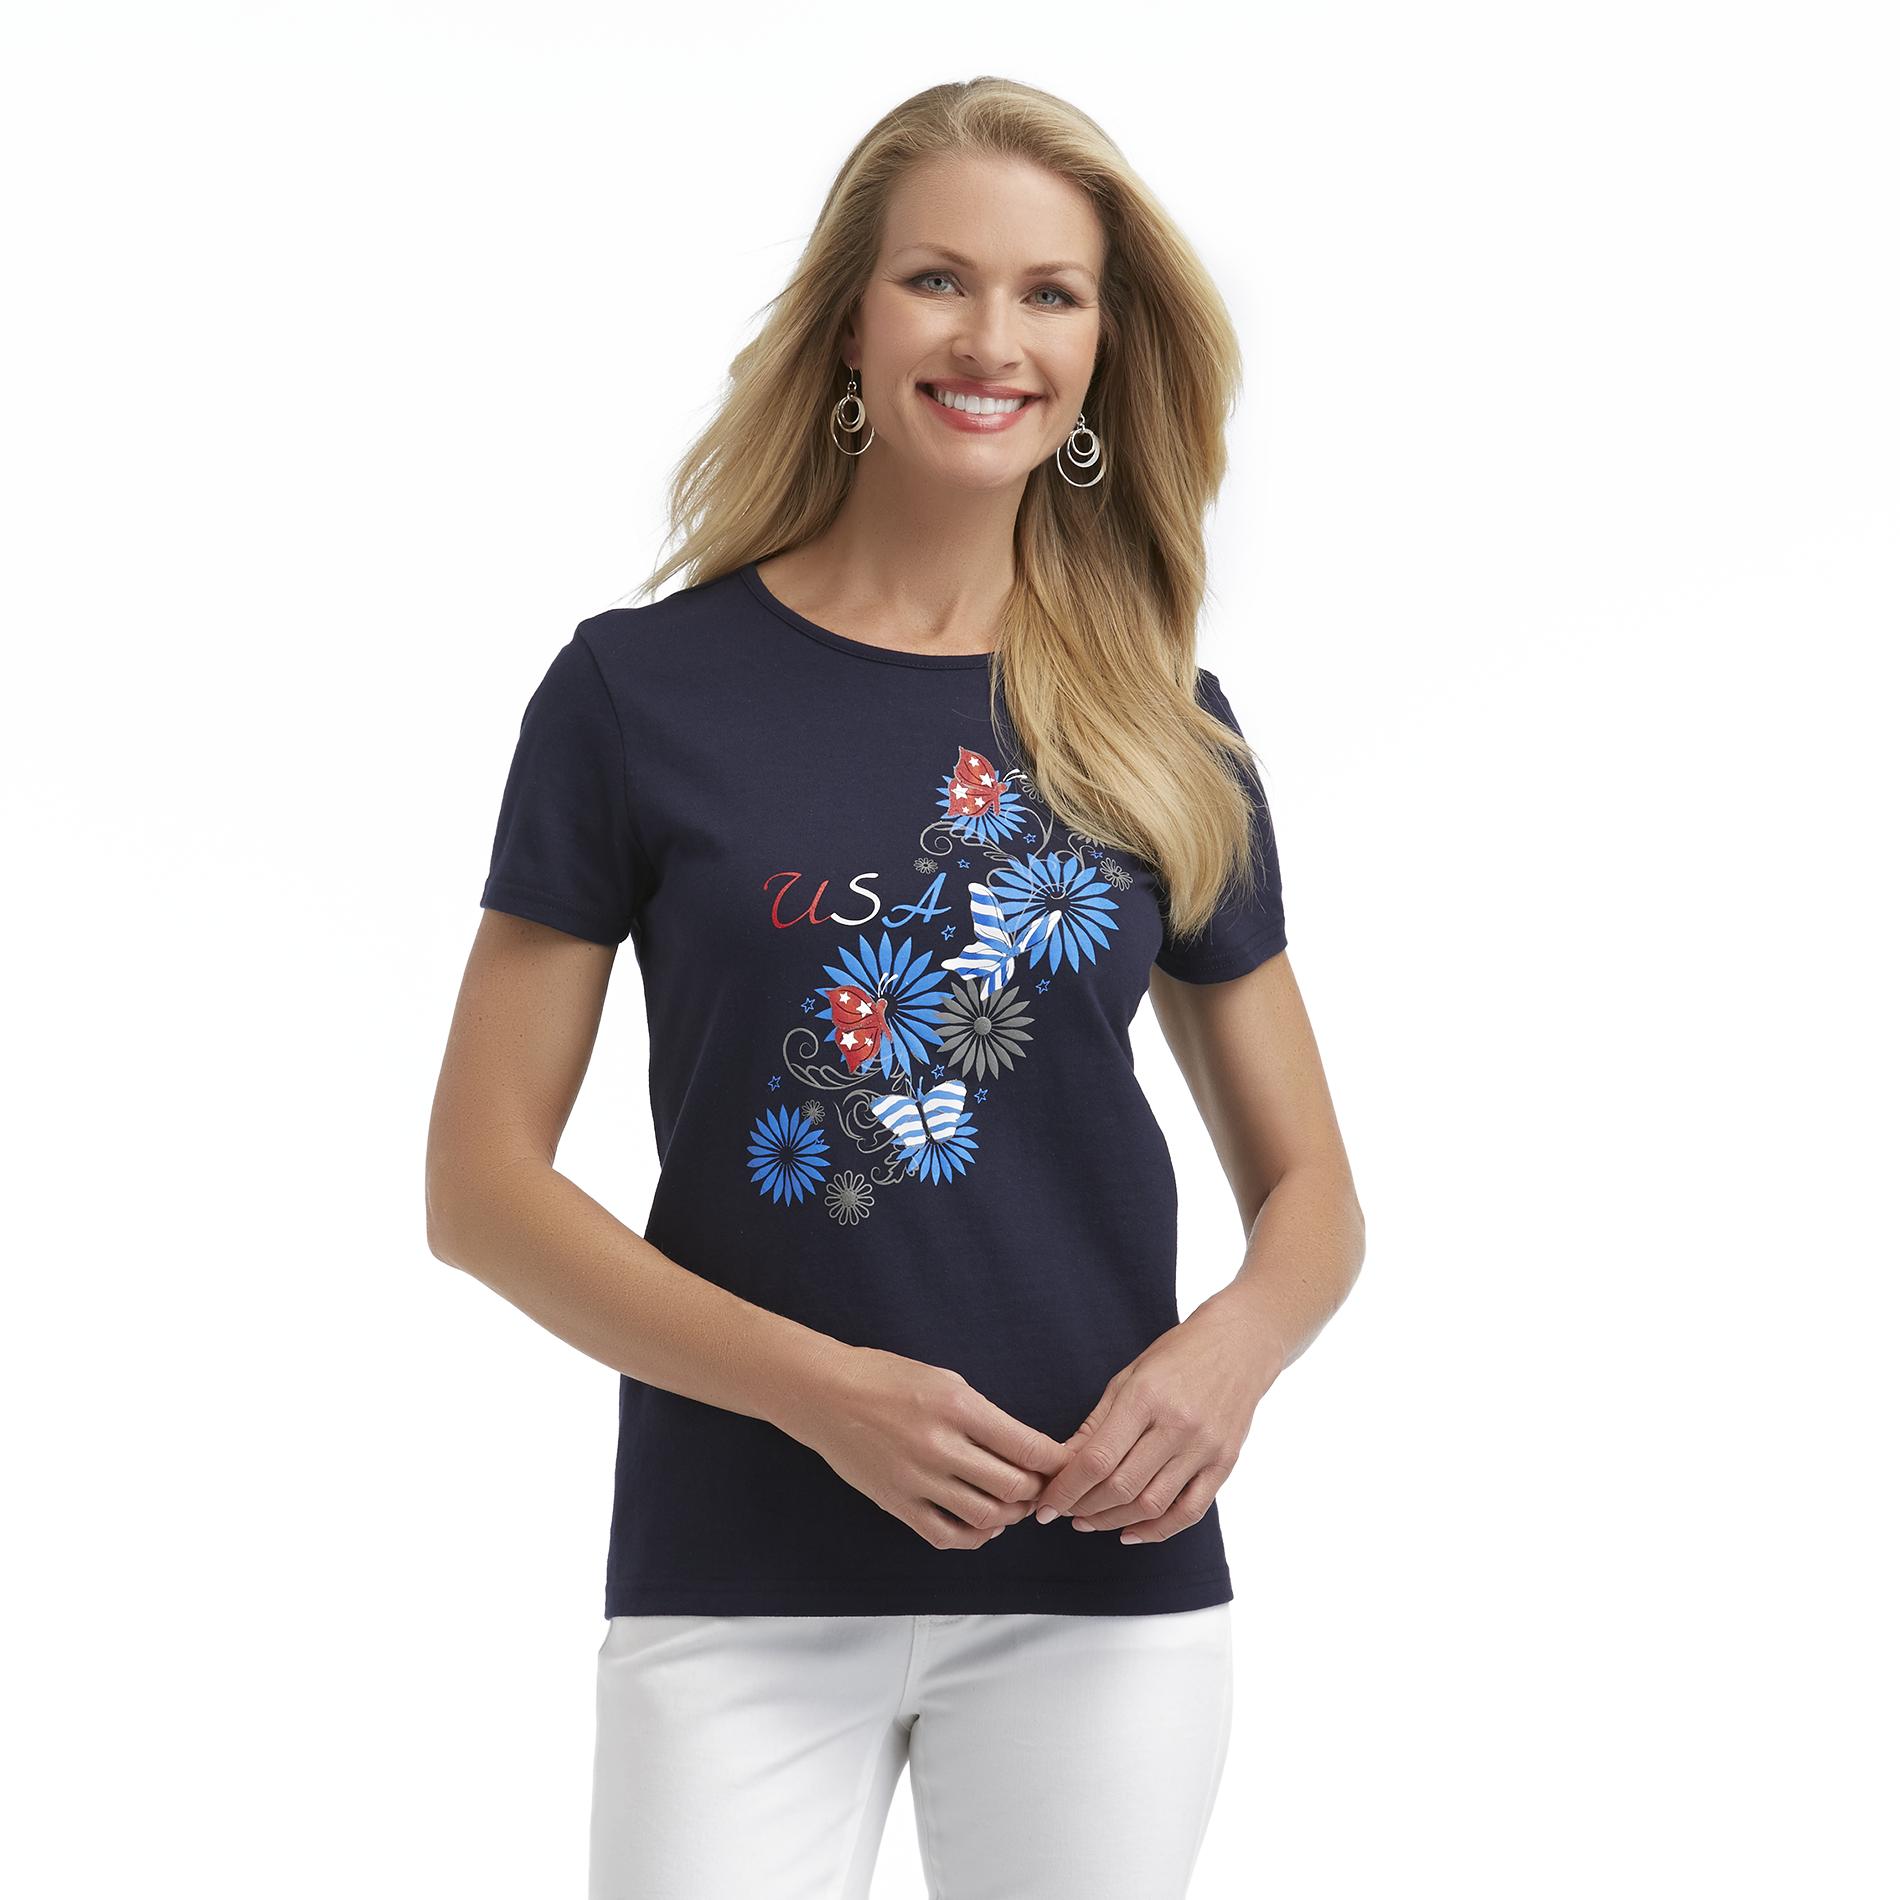 Holiday Editions Women's Graphic T-Shirt - USA